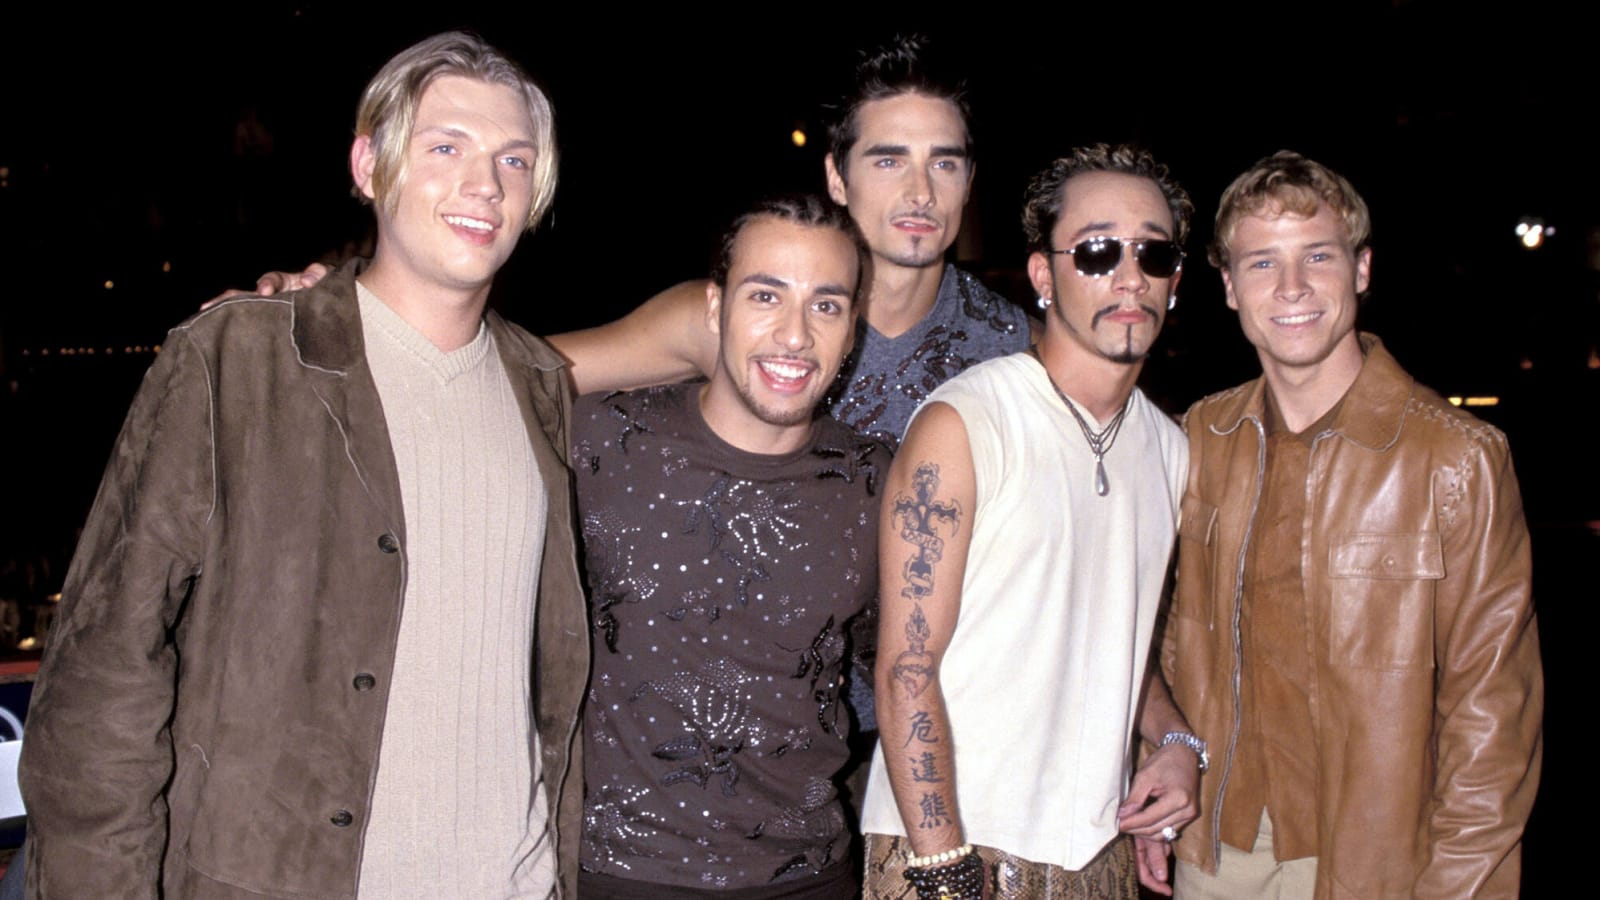 The 20 best songs by boy bands